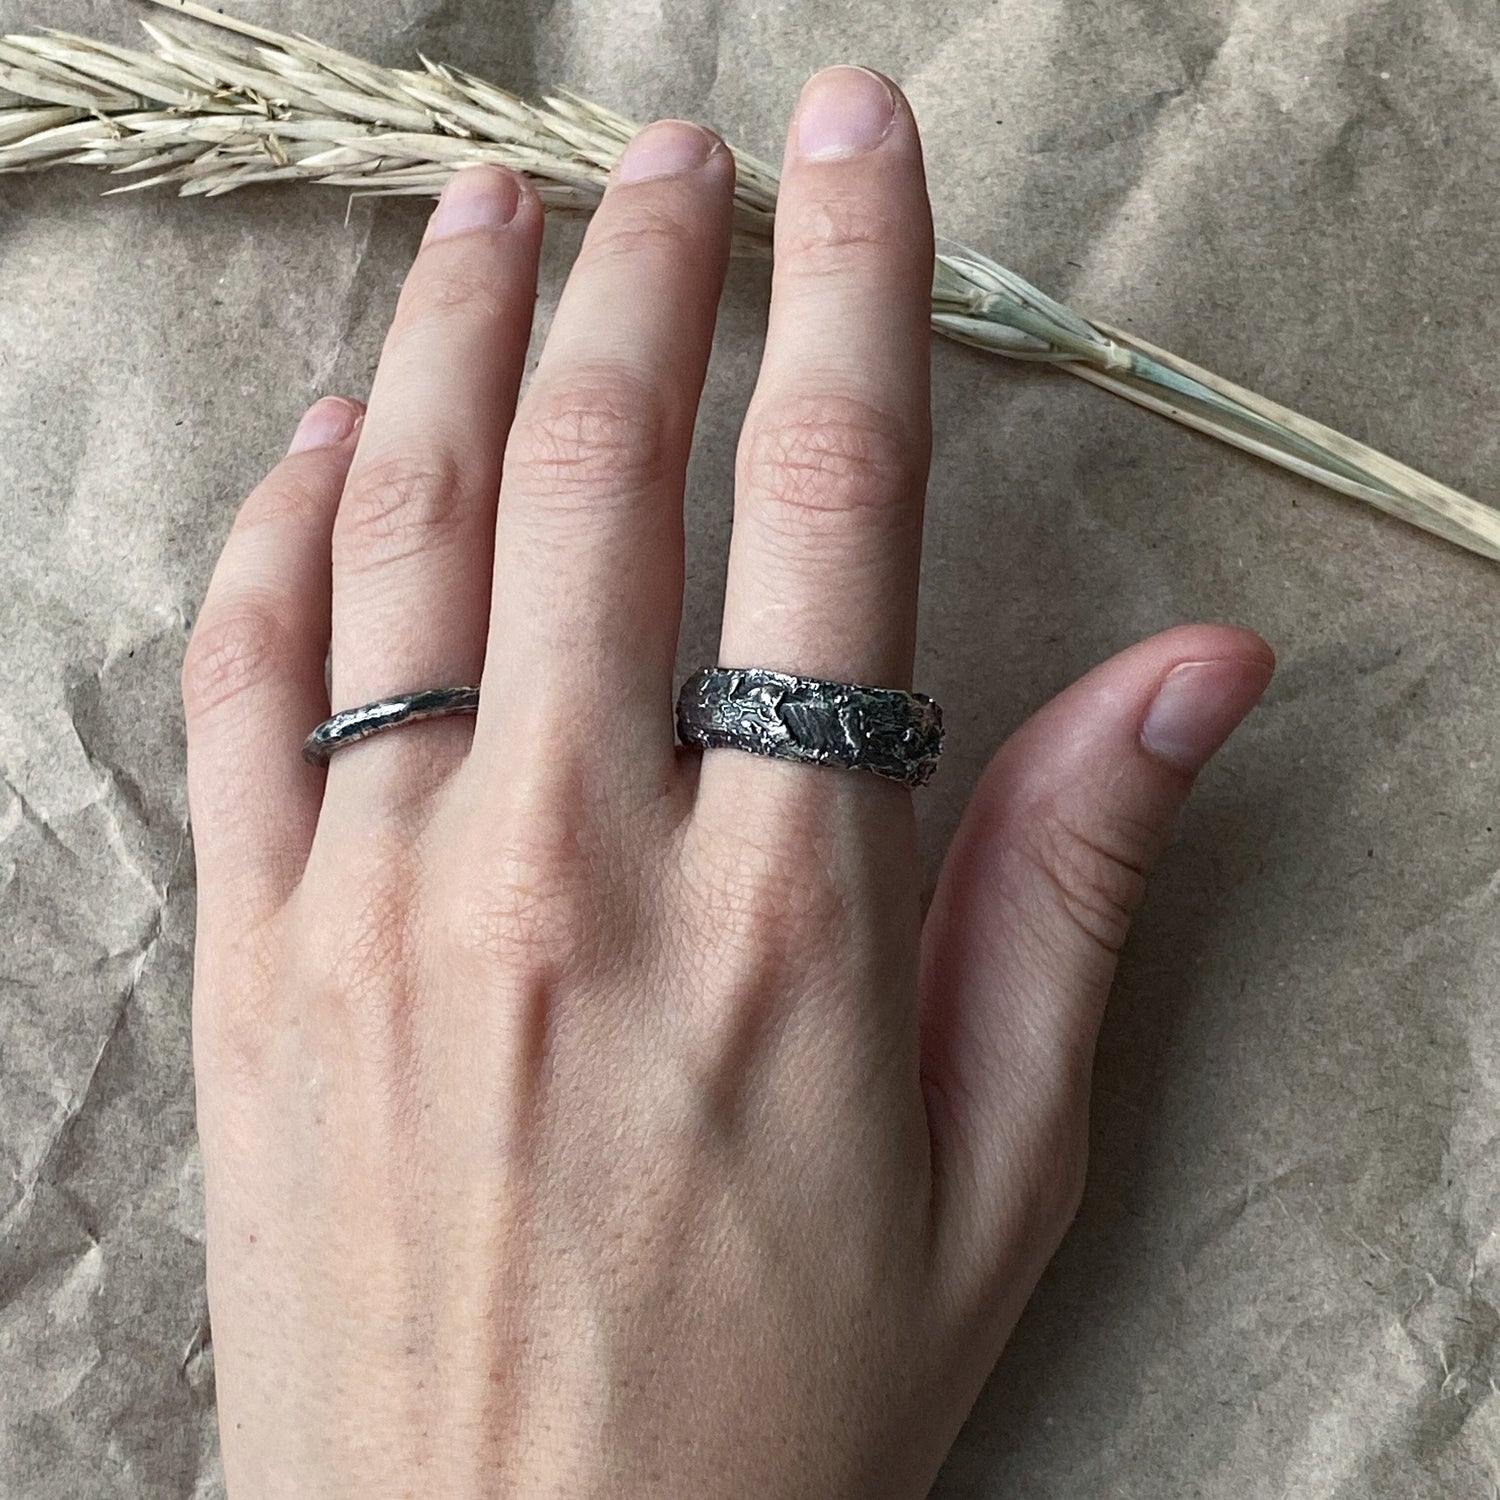 Mono ring- simple minimalist ring with soft scratched texture Lightweight rings Project50g 